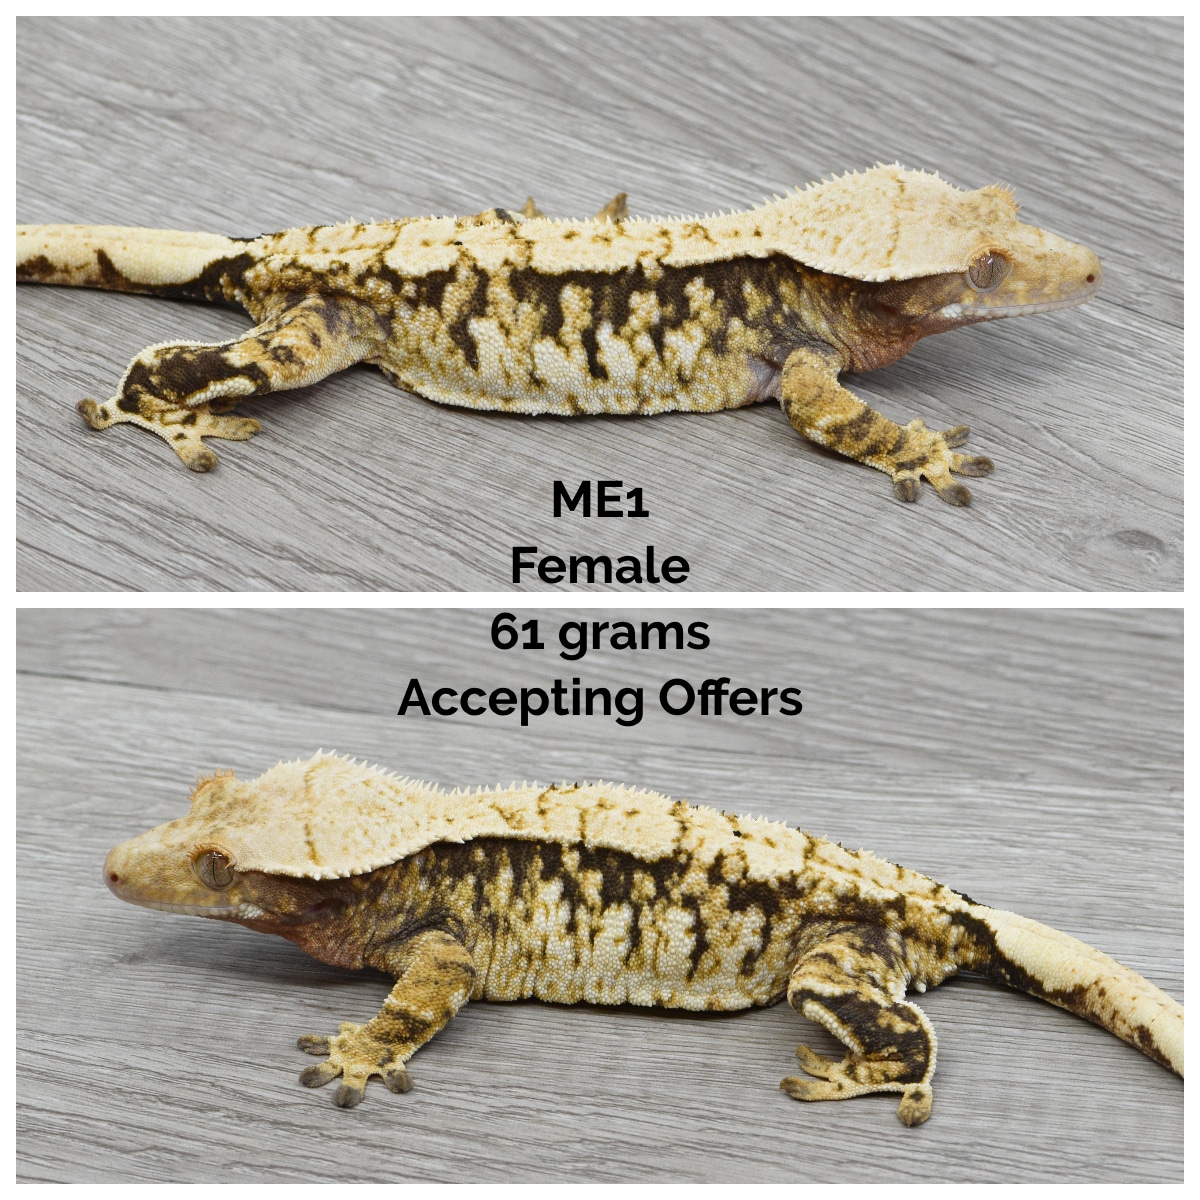 2Extreme Harlequin Crested Gecko by Kryptiles